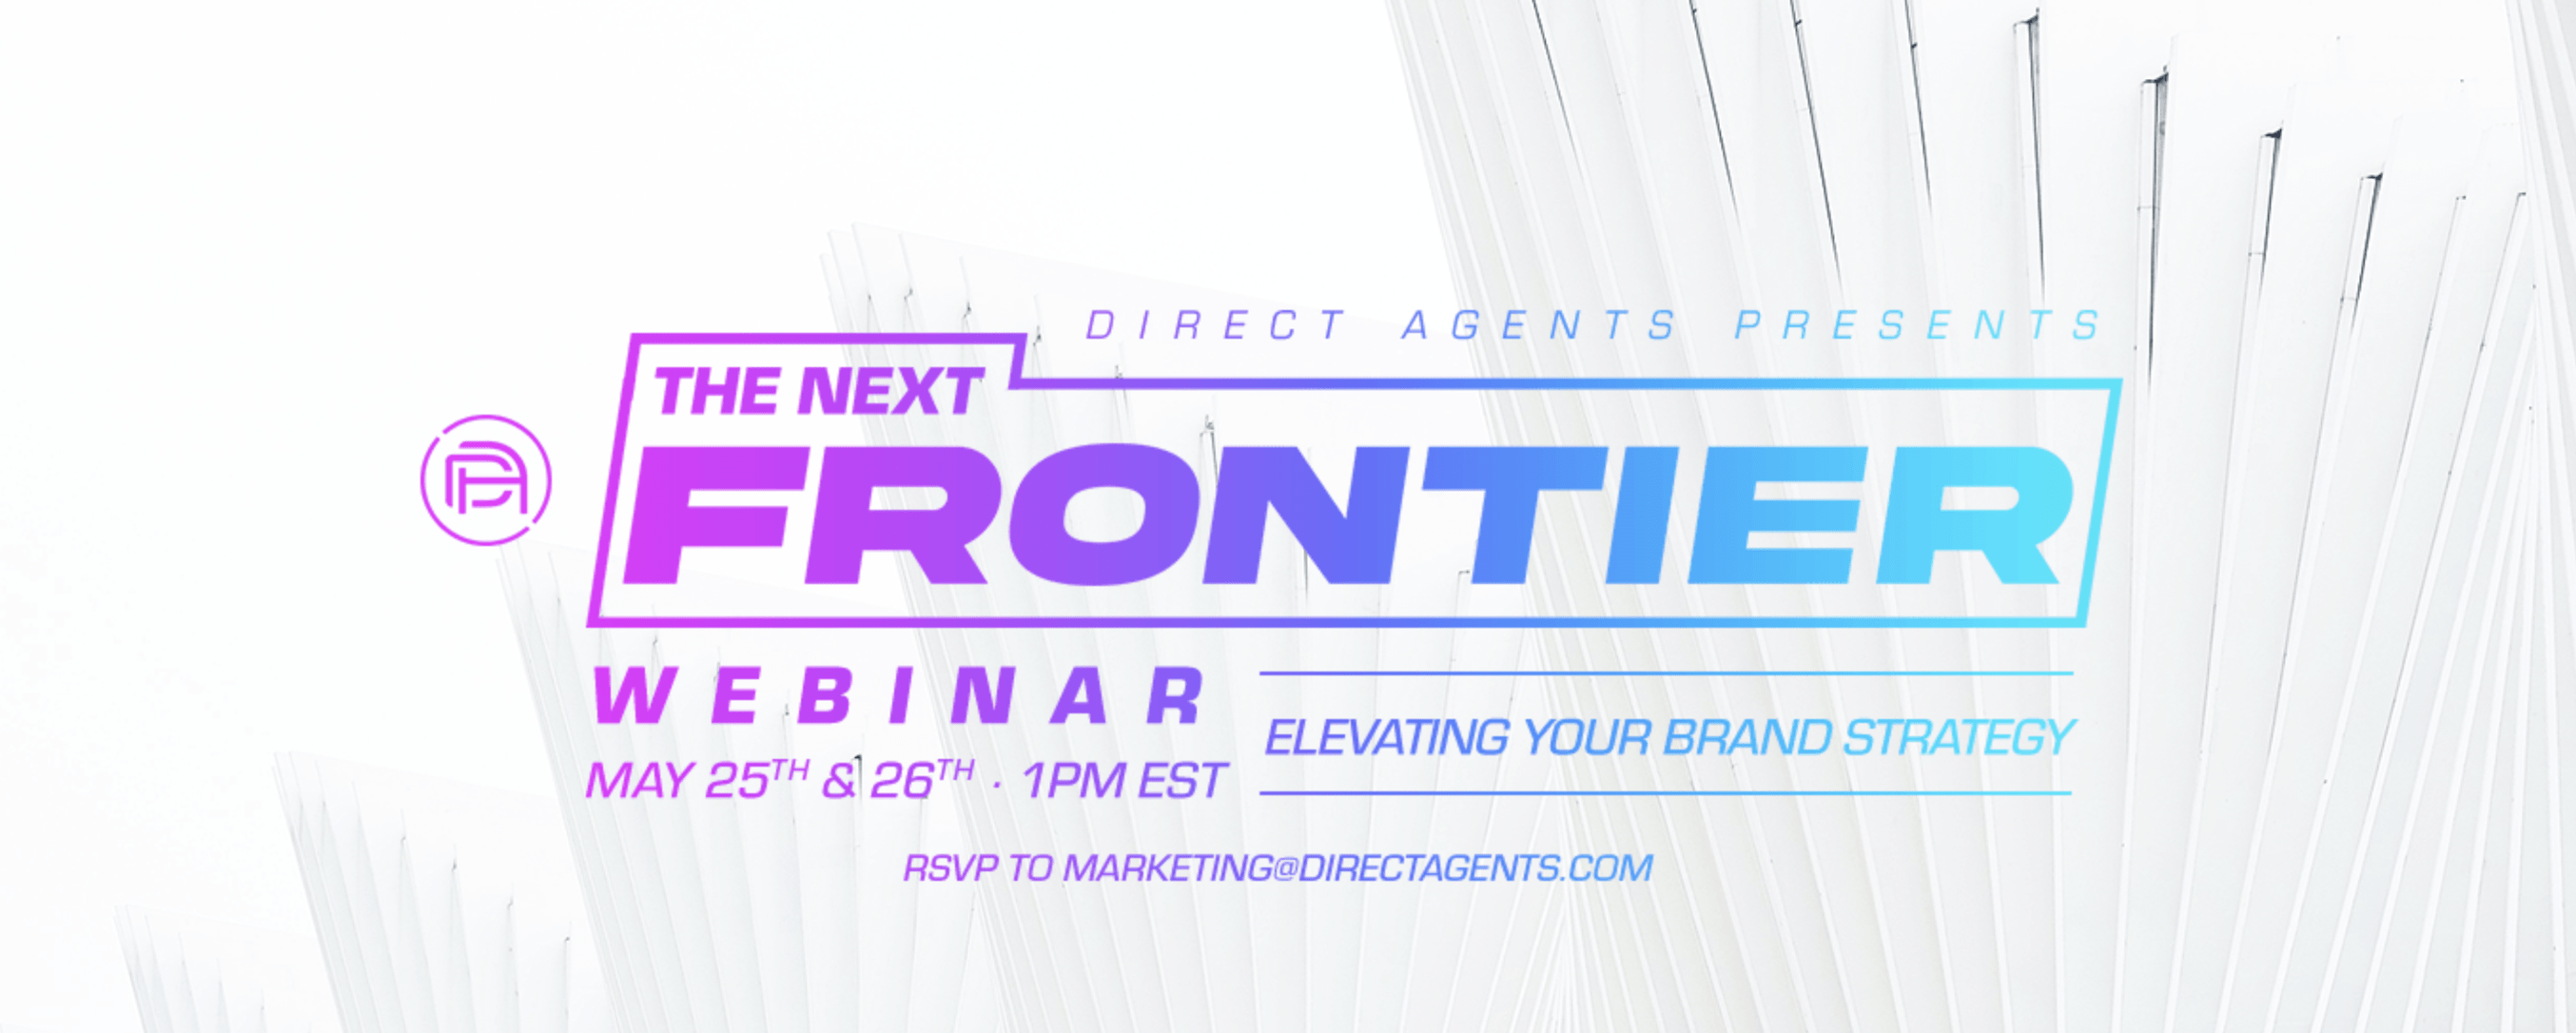 Join us at The Next Frontier: Elevating Your Brand Strategy